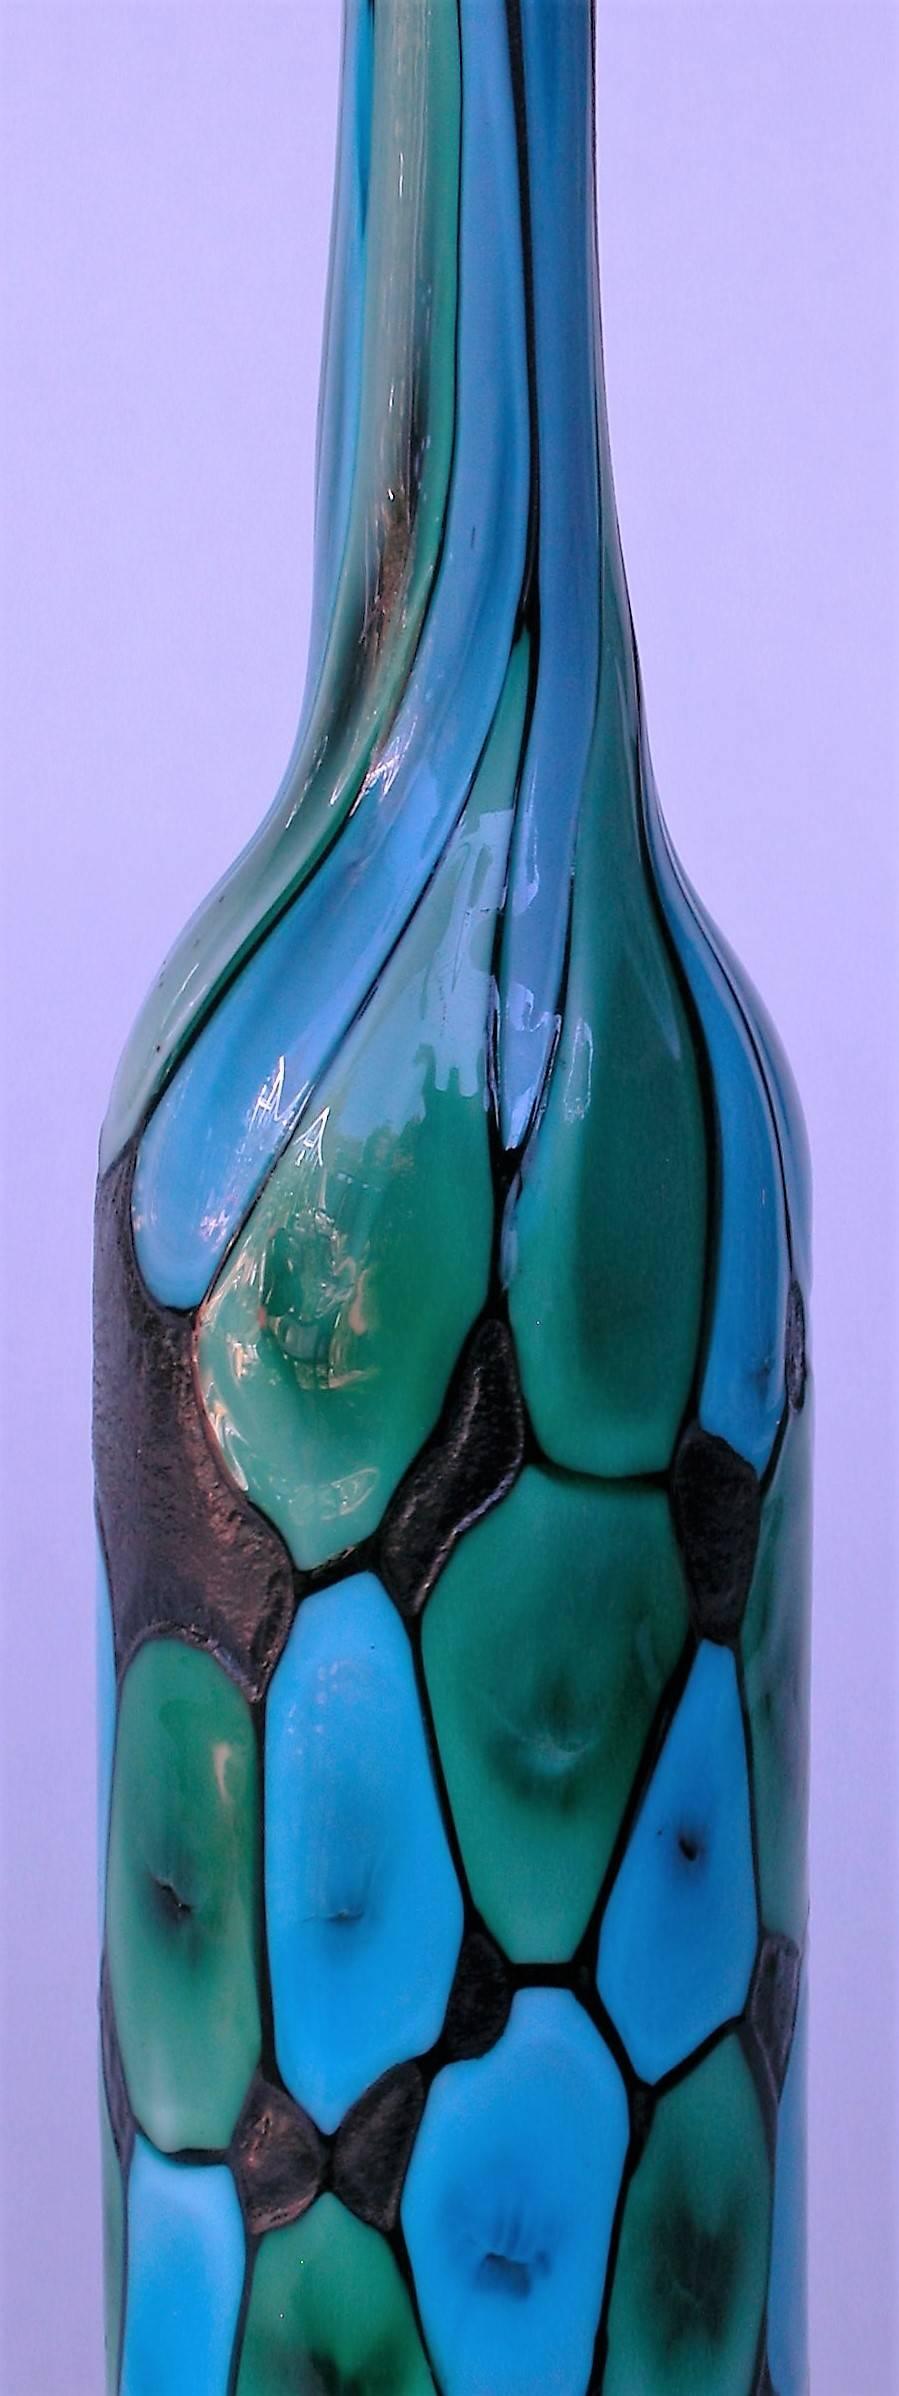 Nerox a petoni vase with blobs in green and blue, designed by Ermanno Toso most likely
for the 1958 Venice Biennale.
With paper label on the bottom.

Literature.: Leslie Piña, Schiffer Book.
Fratelli Toso, Italian Glass 1854-1980, Page 130 and